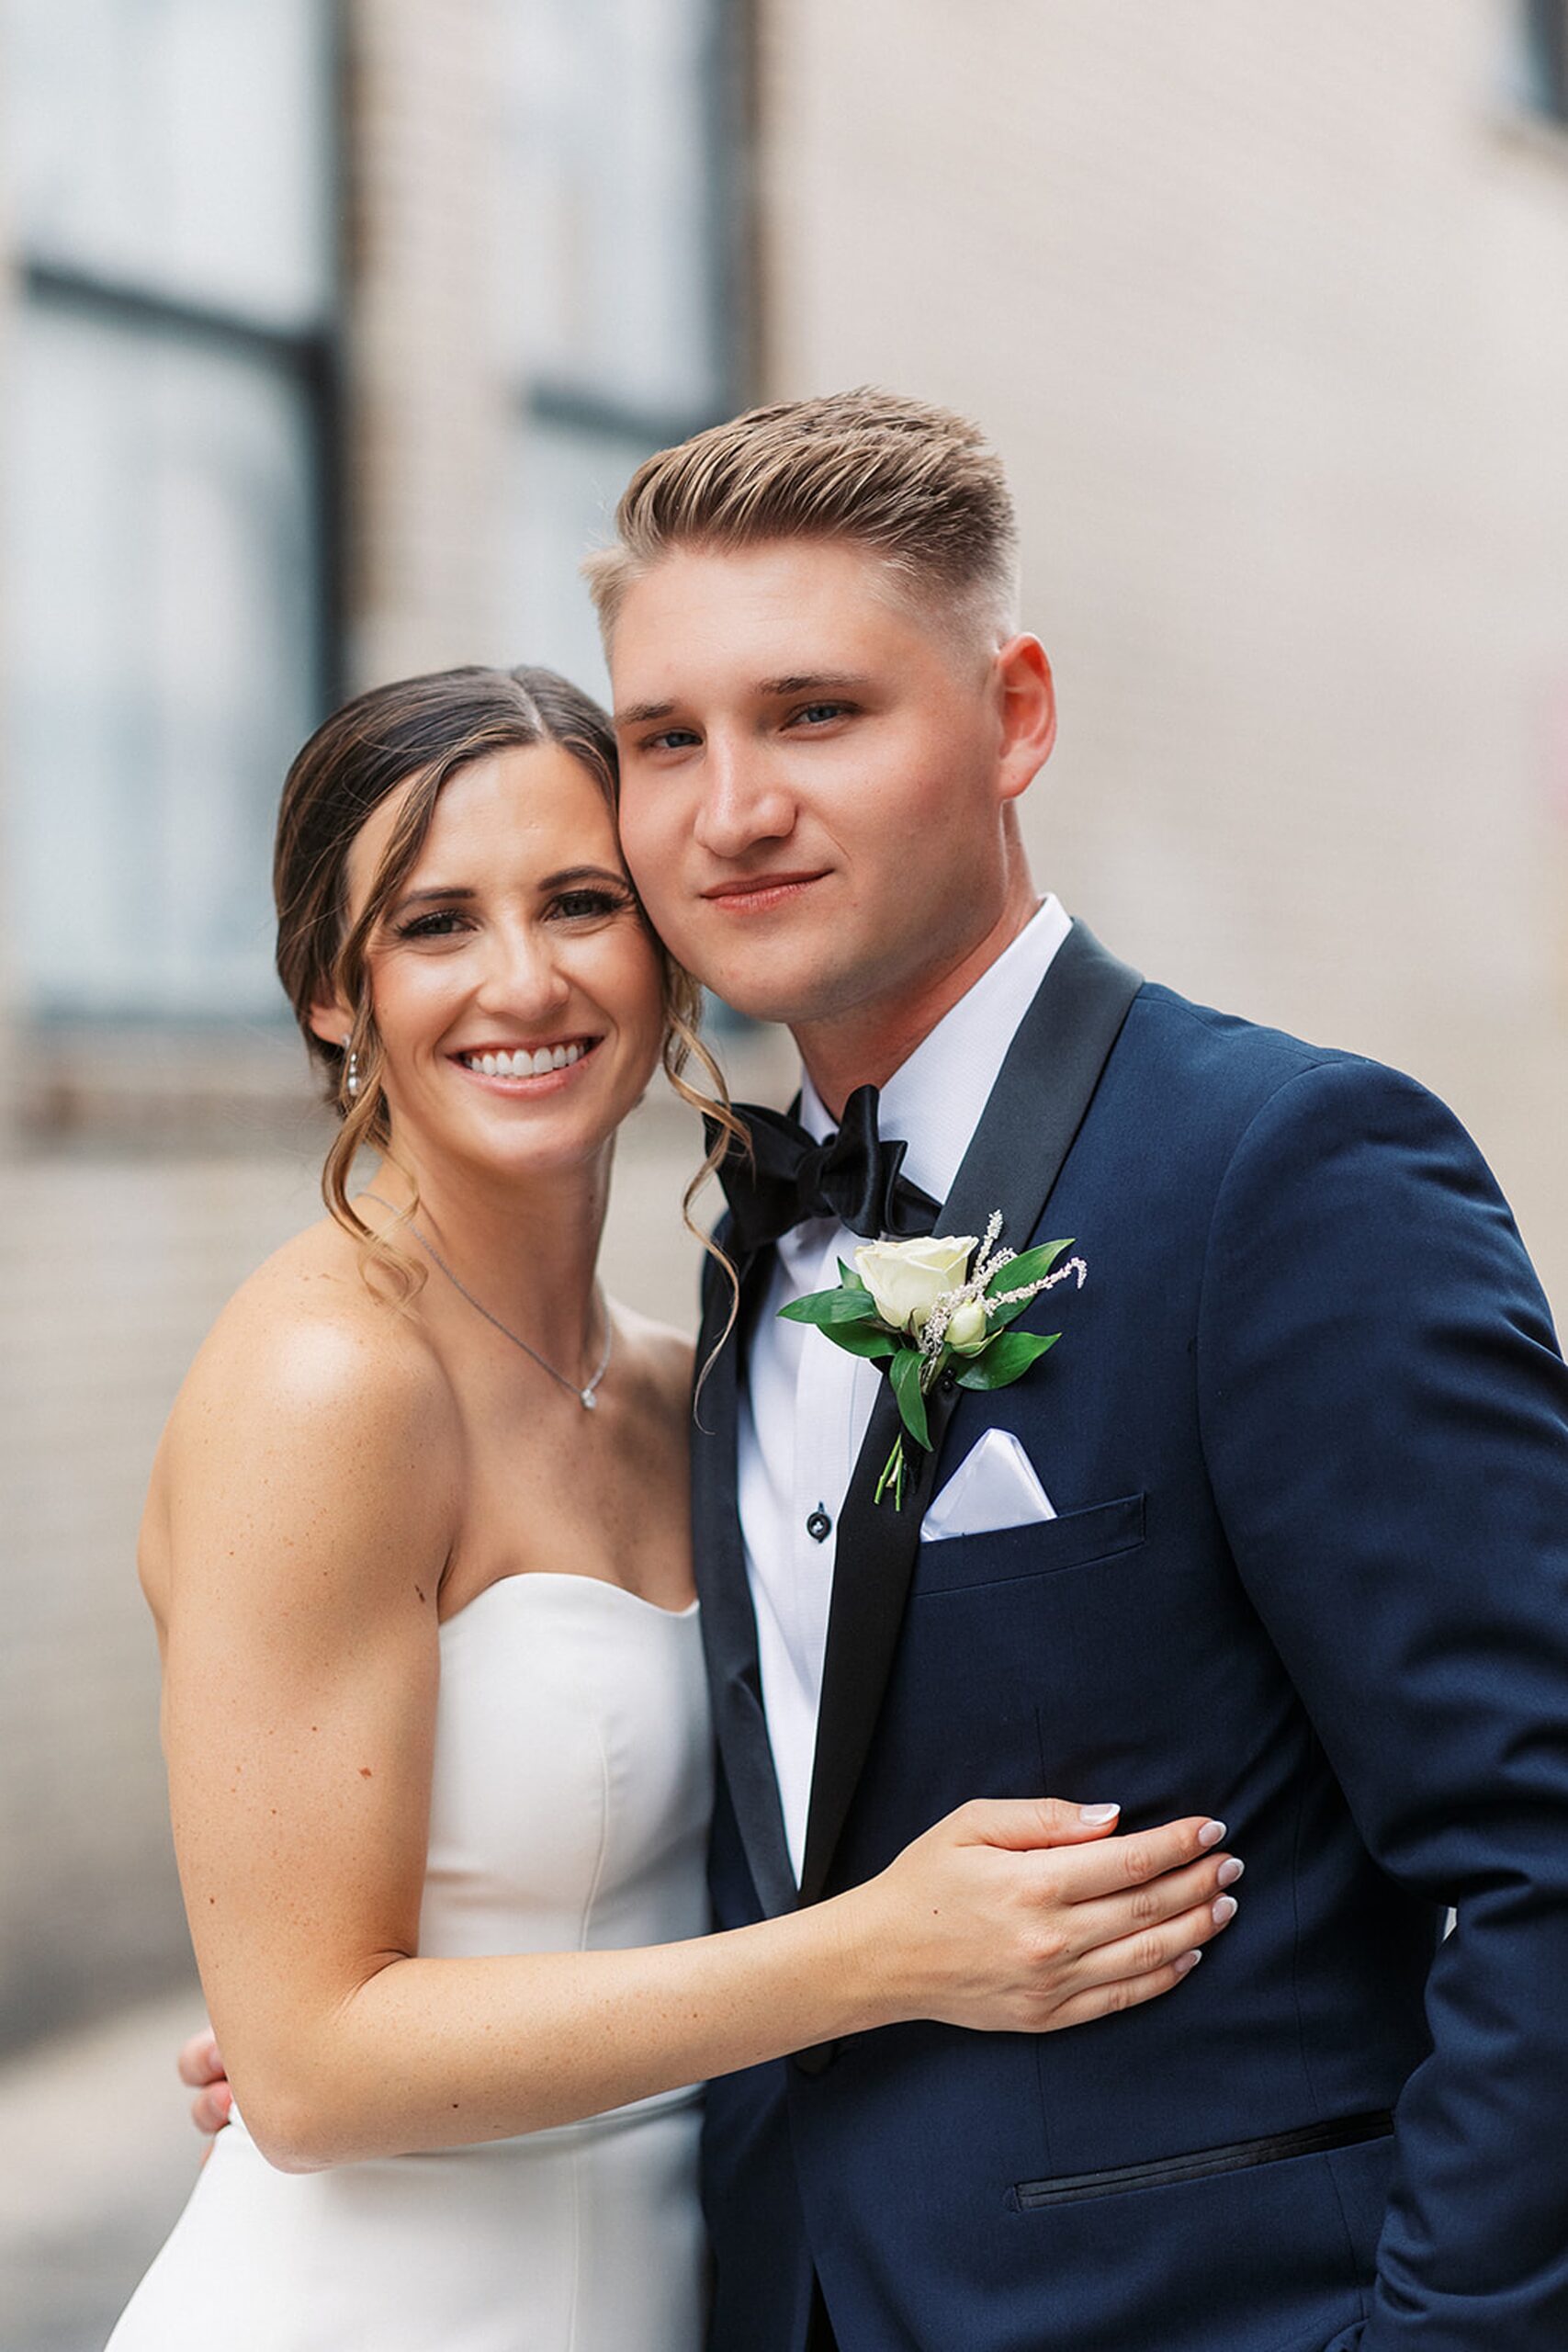 Newlyweds embrace in an alley